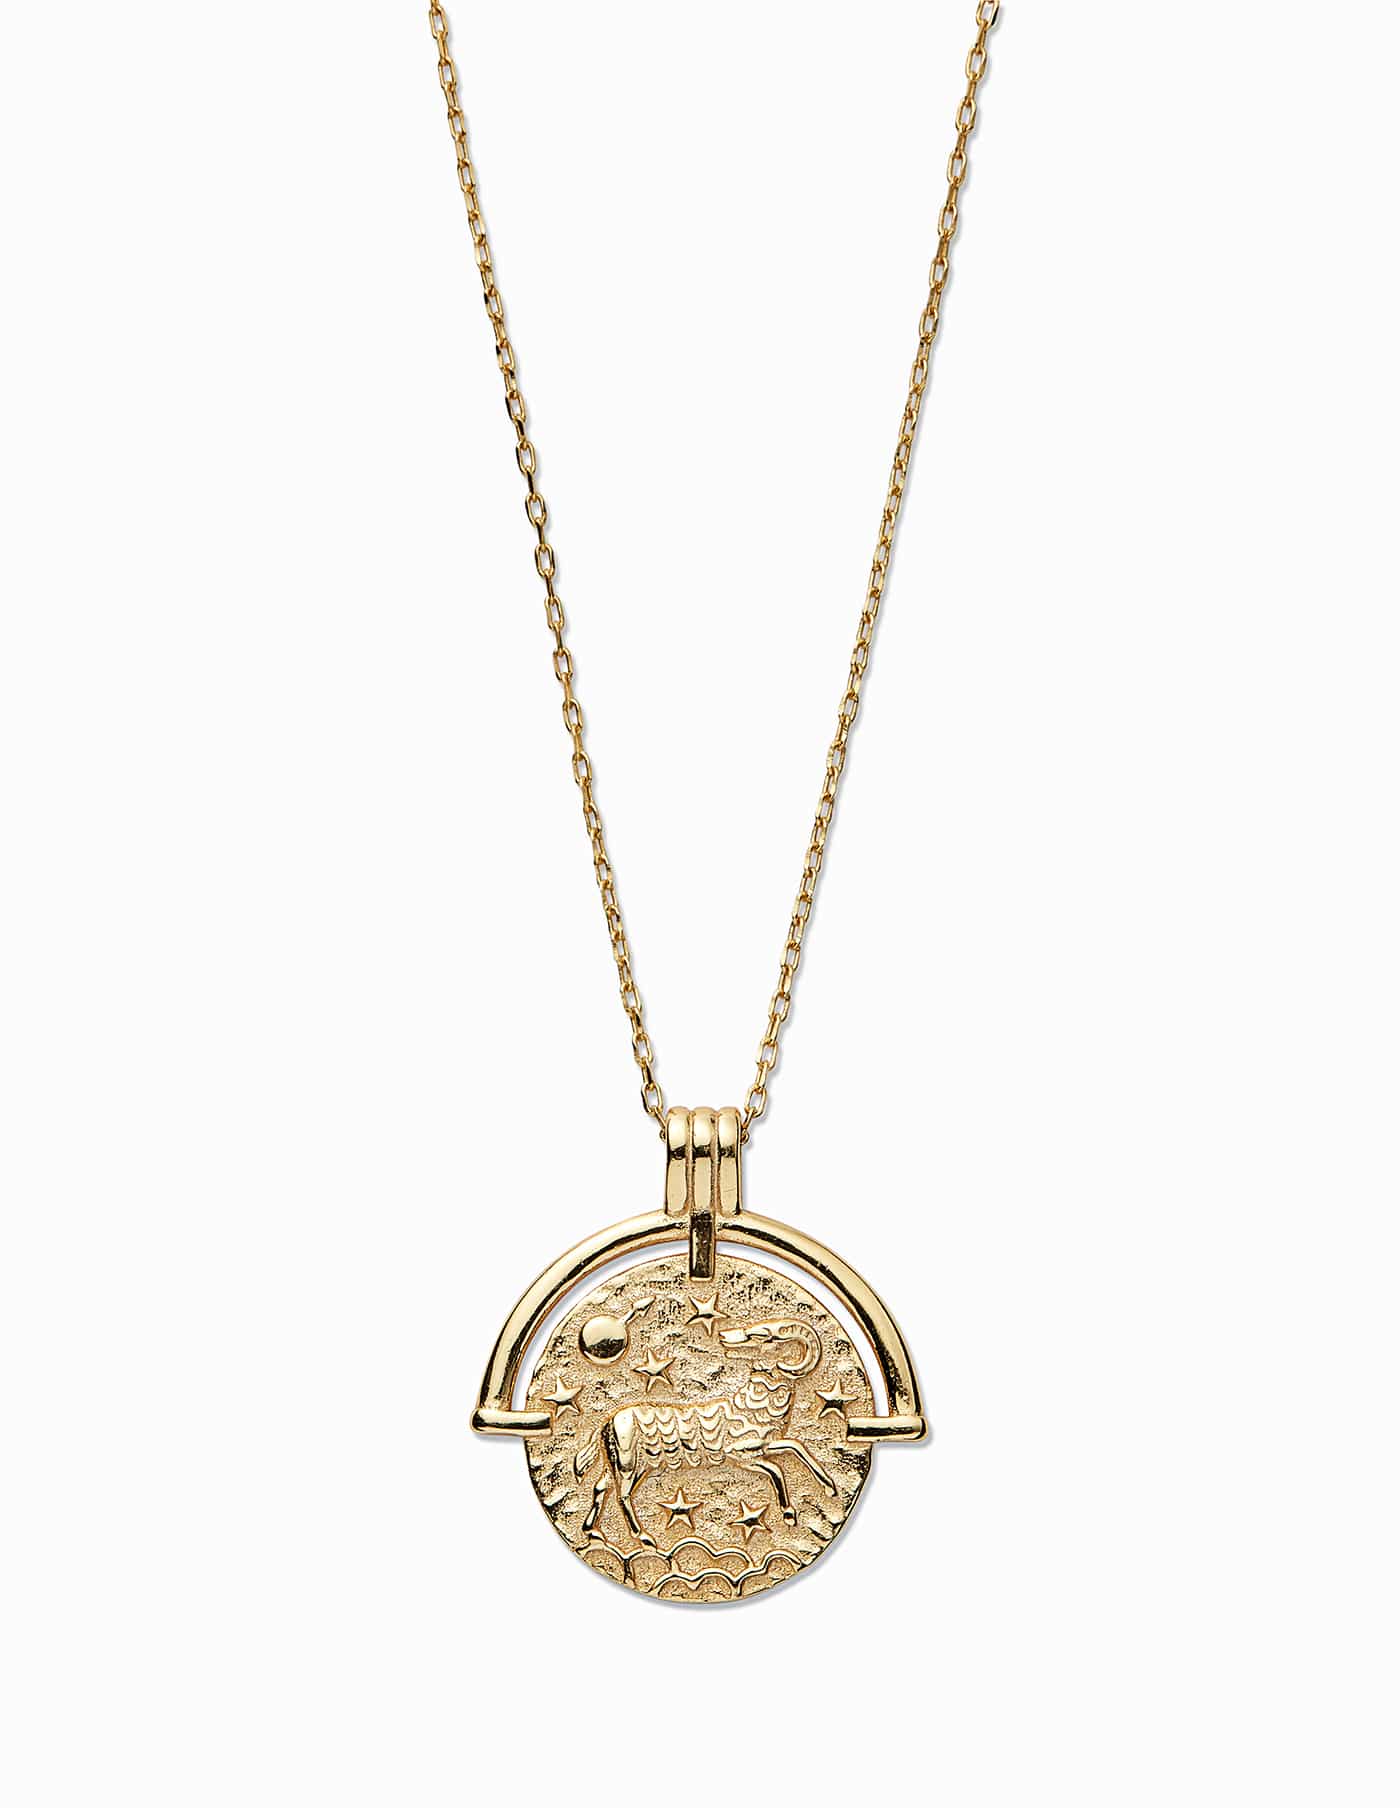 Aries Zodiac Necklace with Coin Pendant, 18k Gold Plated - Nordicmuse